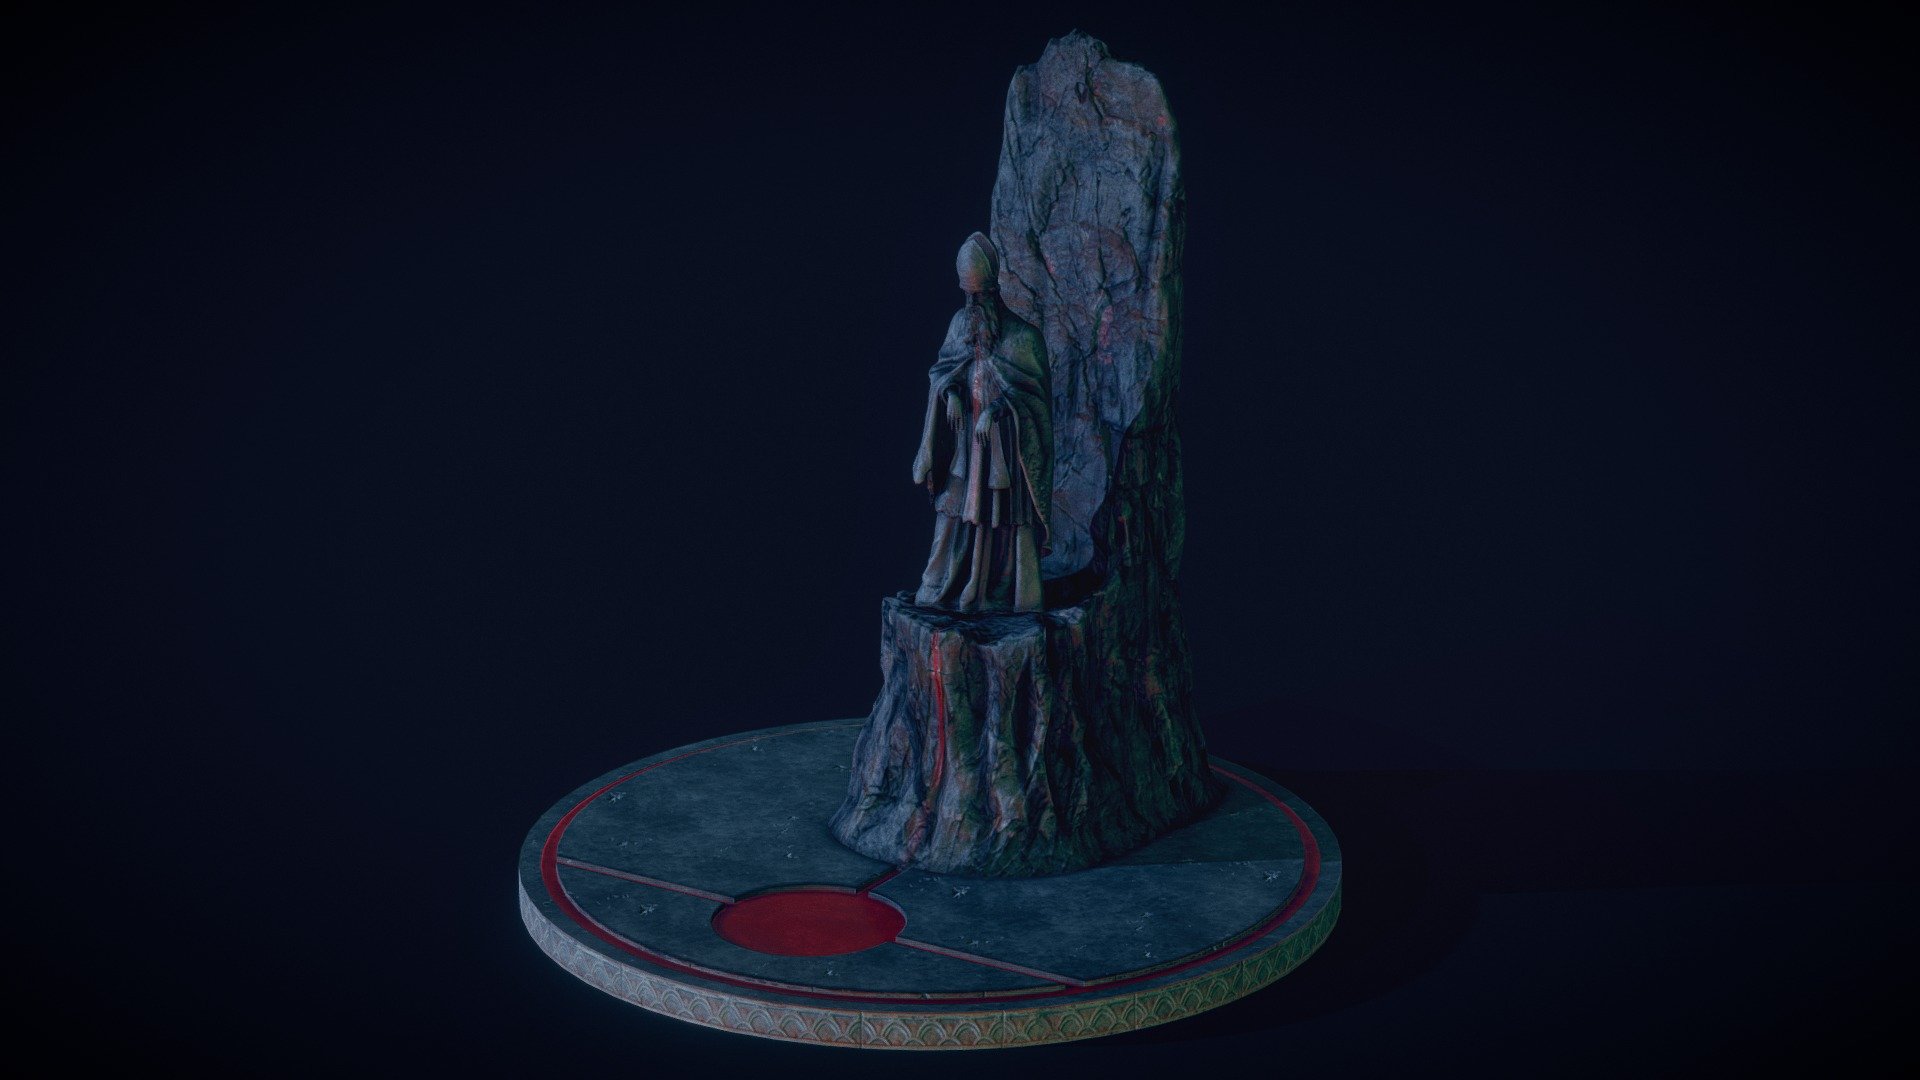 Hellish Fontaine

Inspired by some Heavy Metal band album cover I saw long time ago.

4k PBR textures. 

Separate Materials fot the statue and rock bases 3d model